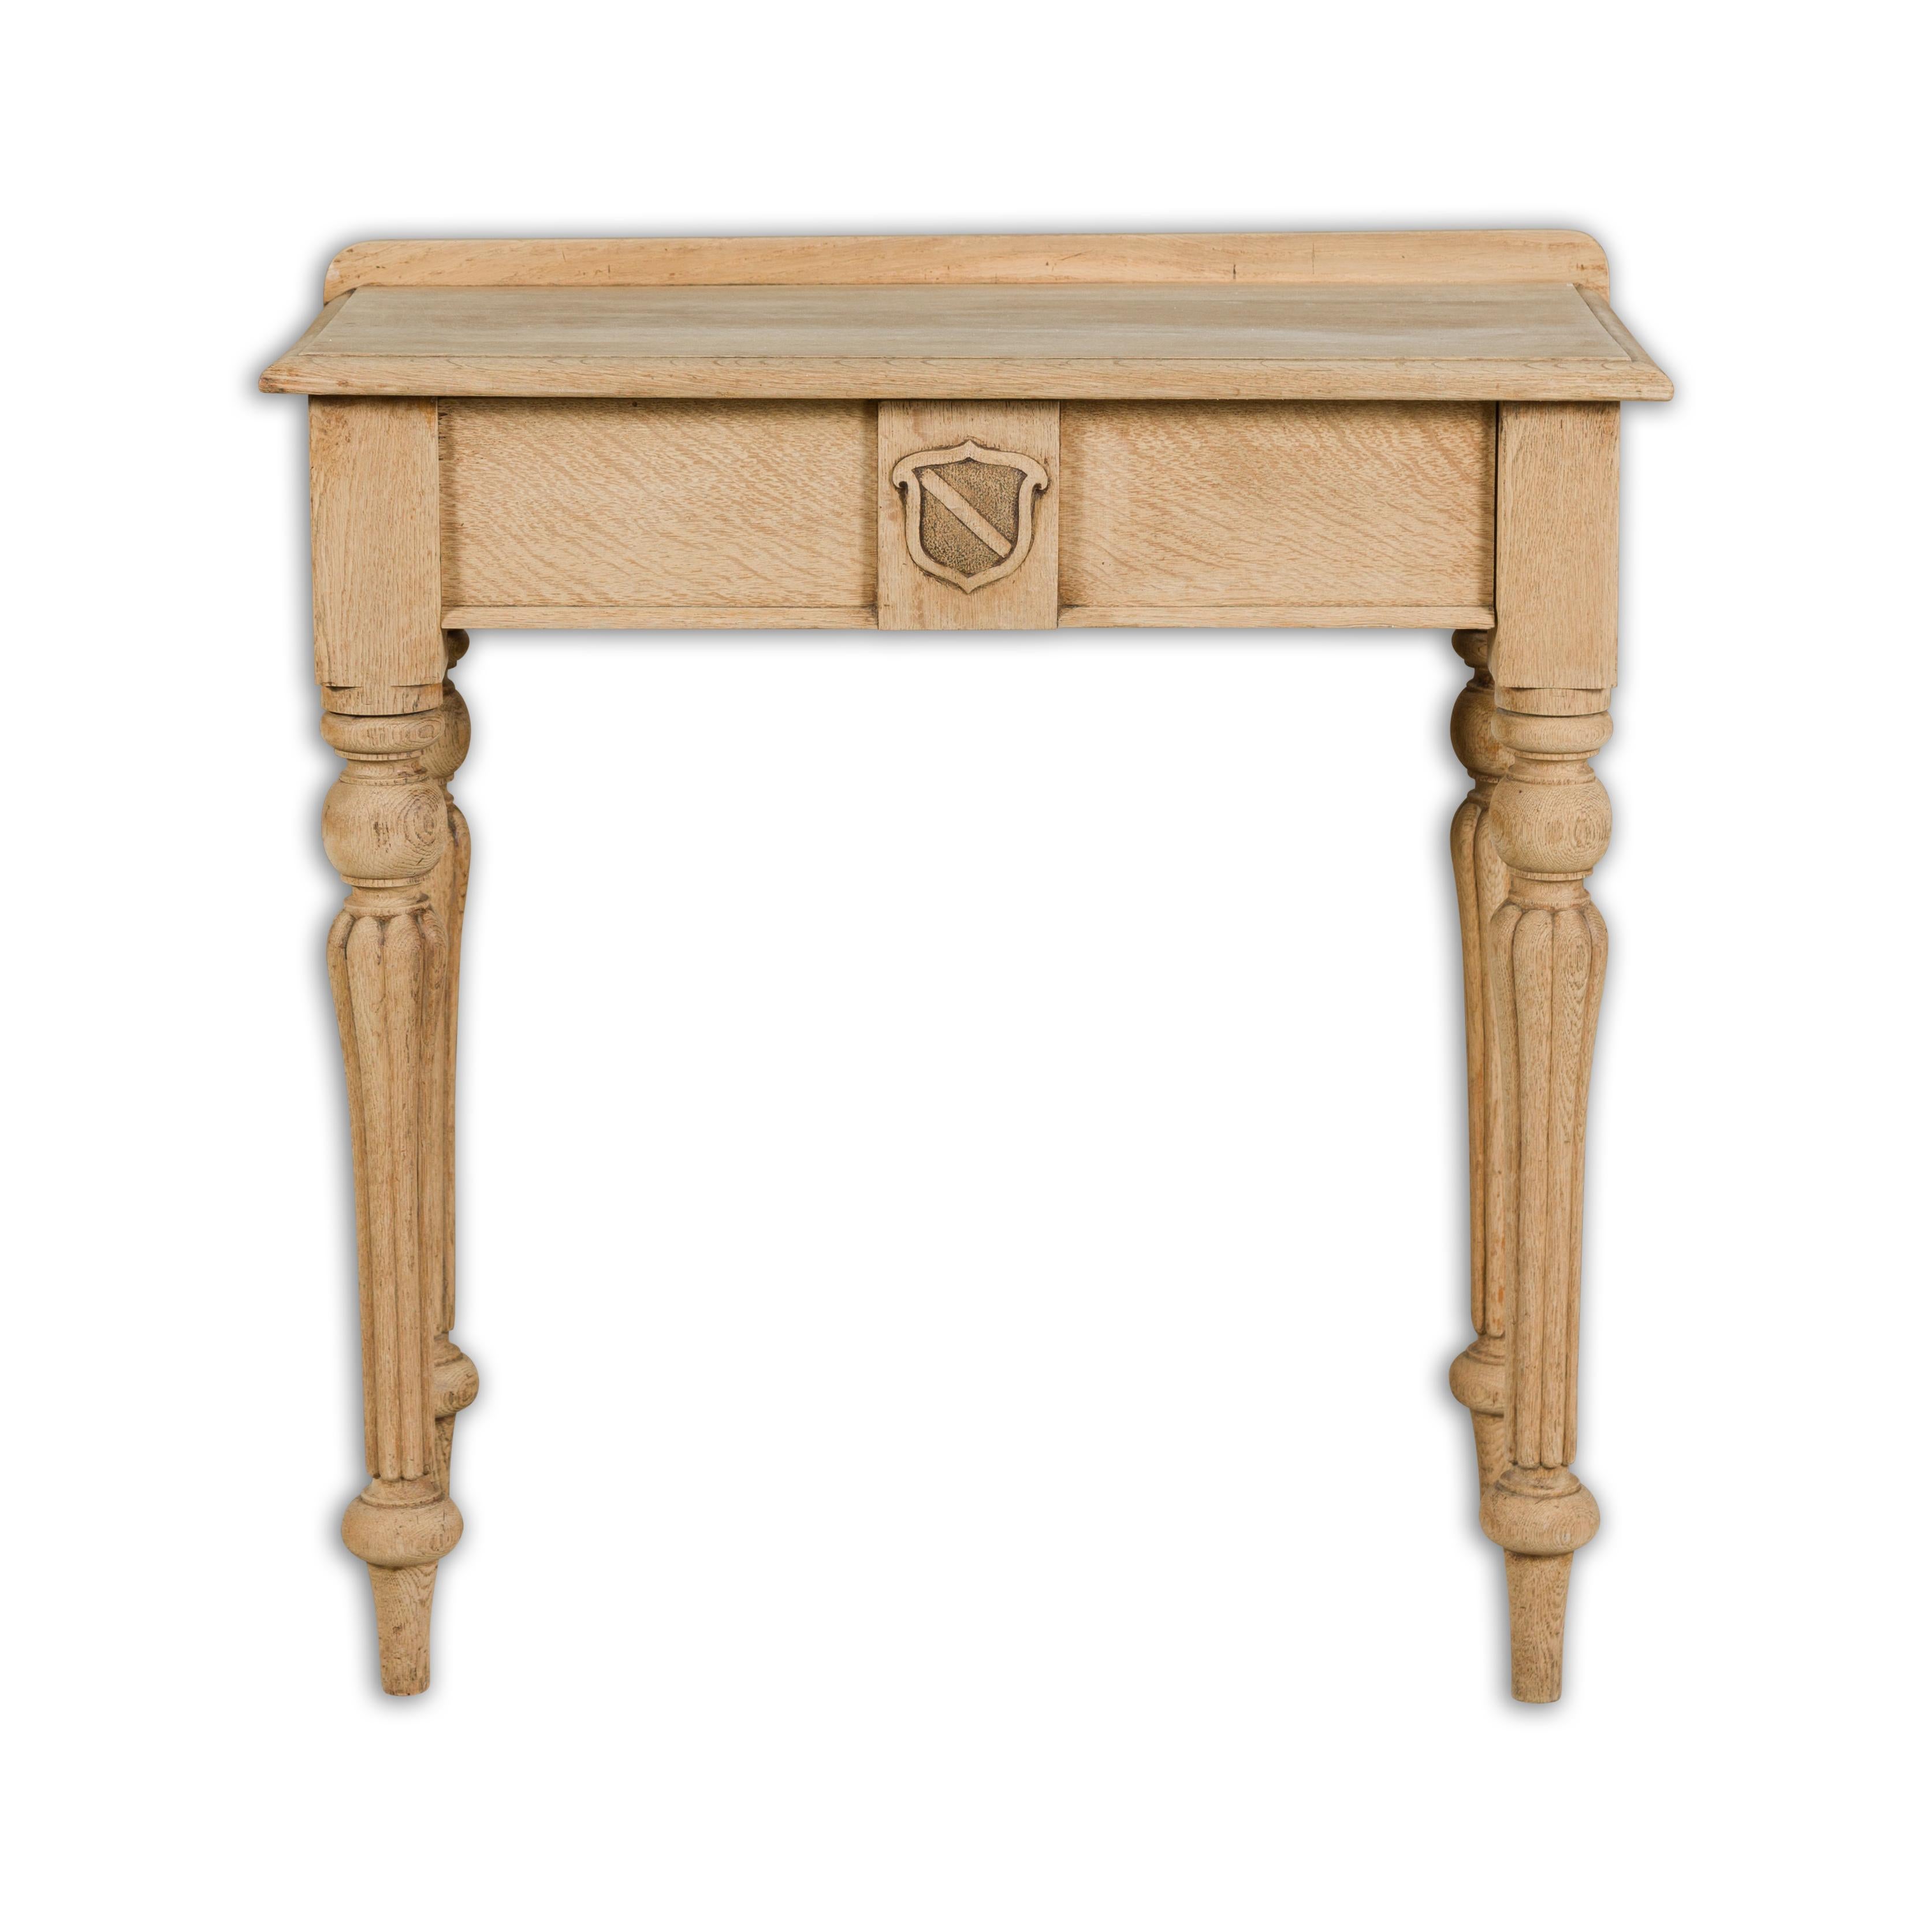 An English bleached oak side table from the 19th century with slightly raised back, single drawer carved with a shield in low-relief, four turned legs adorned with gadroon effects. Introducing a 19th-century English bleached oak side table,